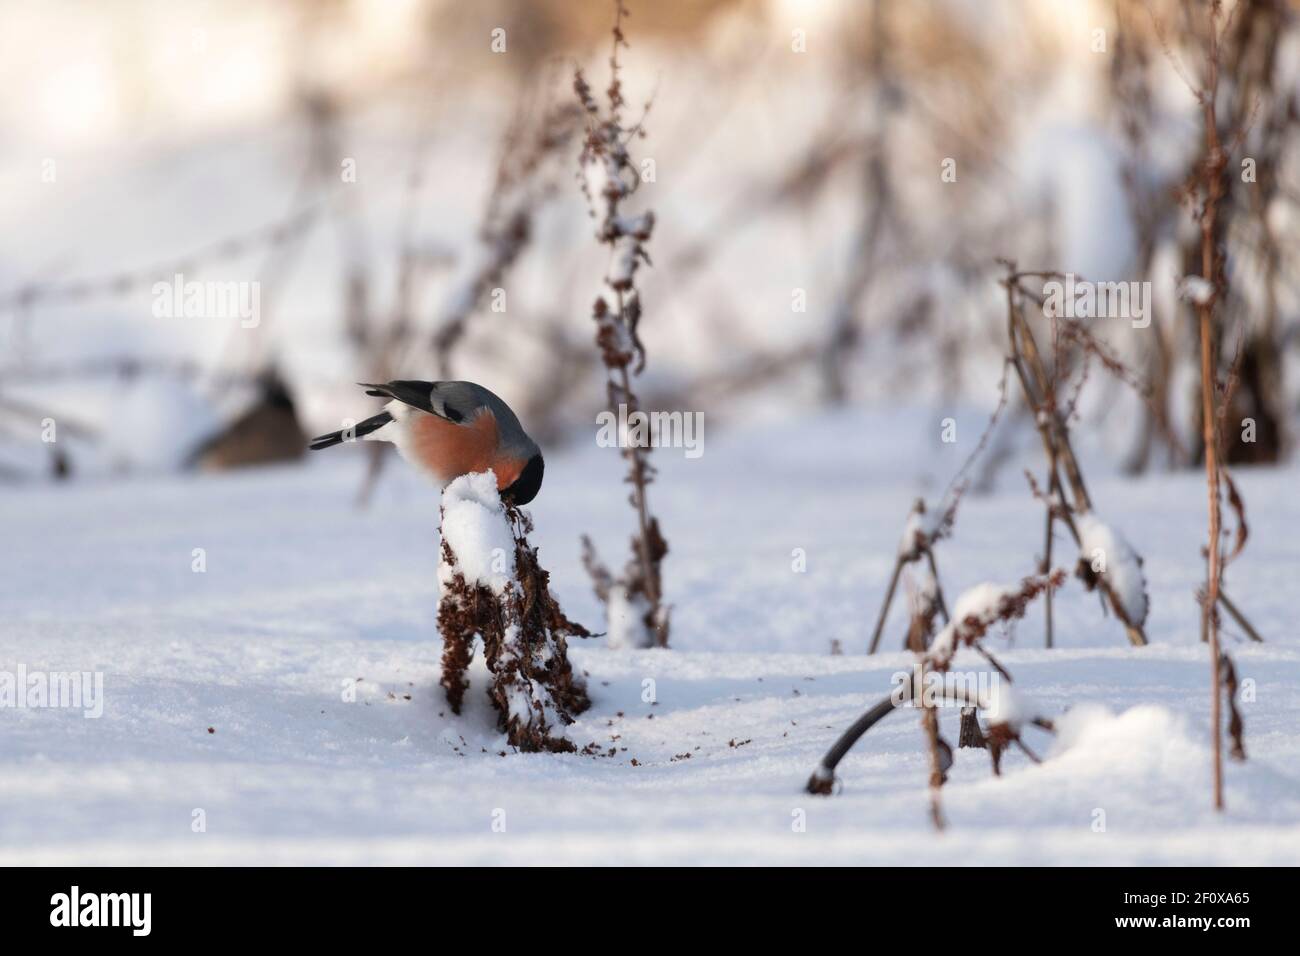 A Male Bullfinch (Pyrrhula Pyrrhula) Picks Seeds From a Broad-Leaved Dock Stem (Rumex Obtusifolius) in a Snow-Covered Pasture Stock Photo